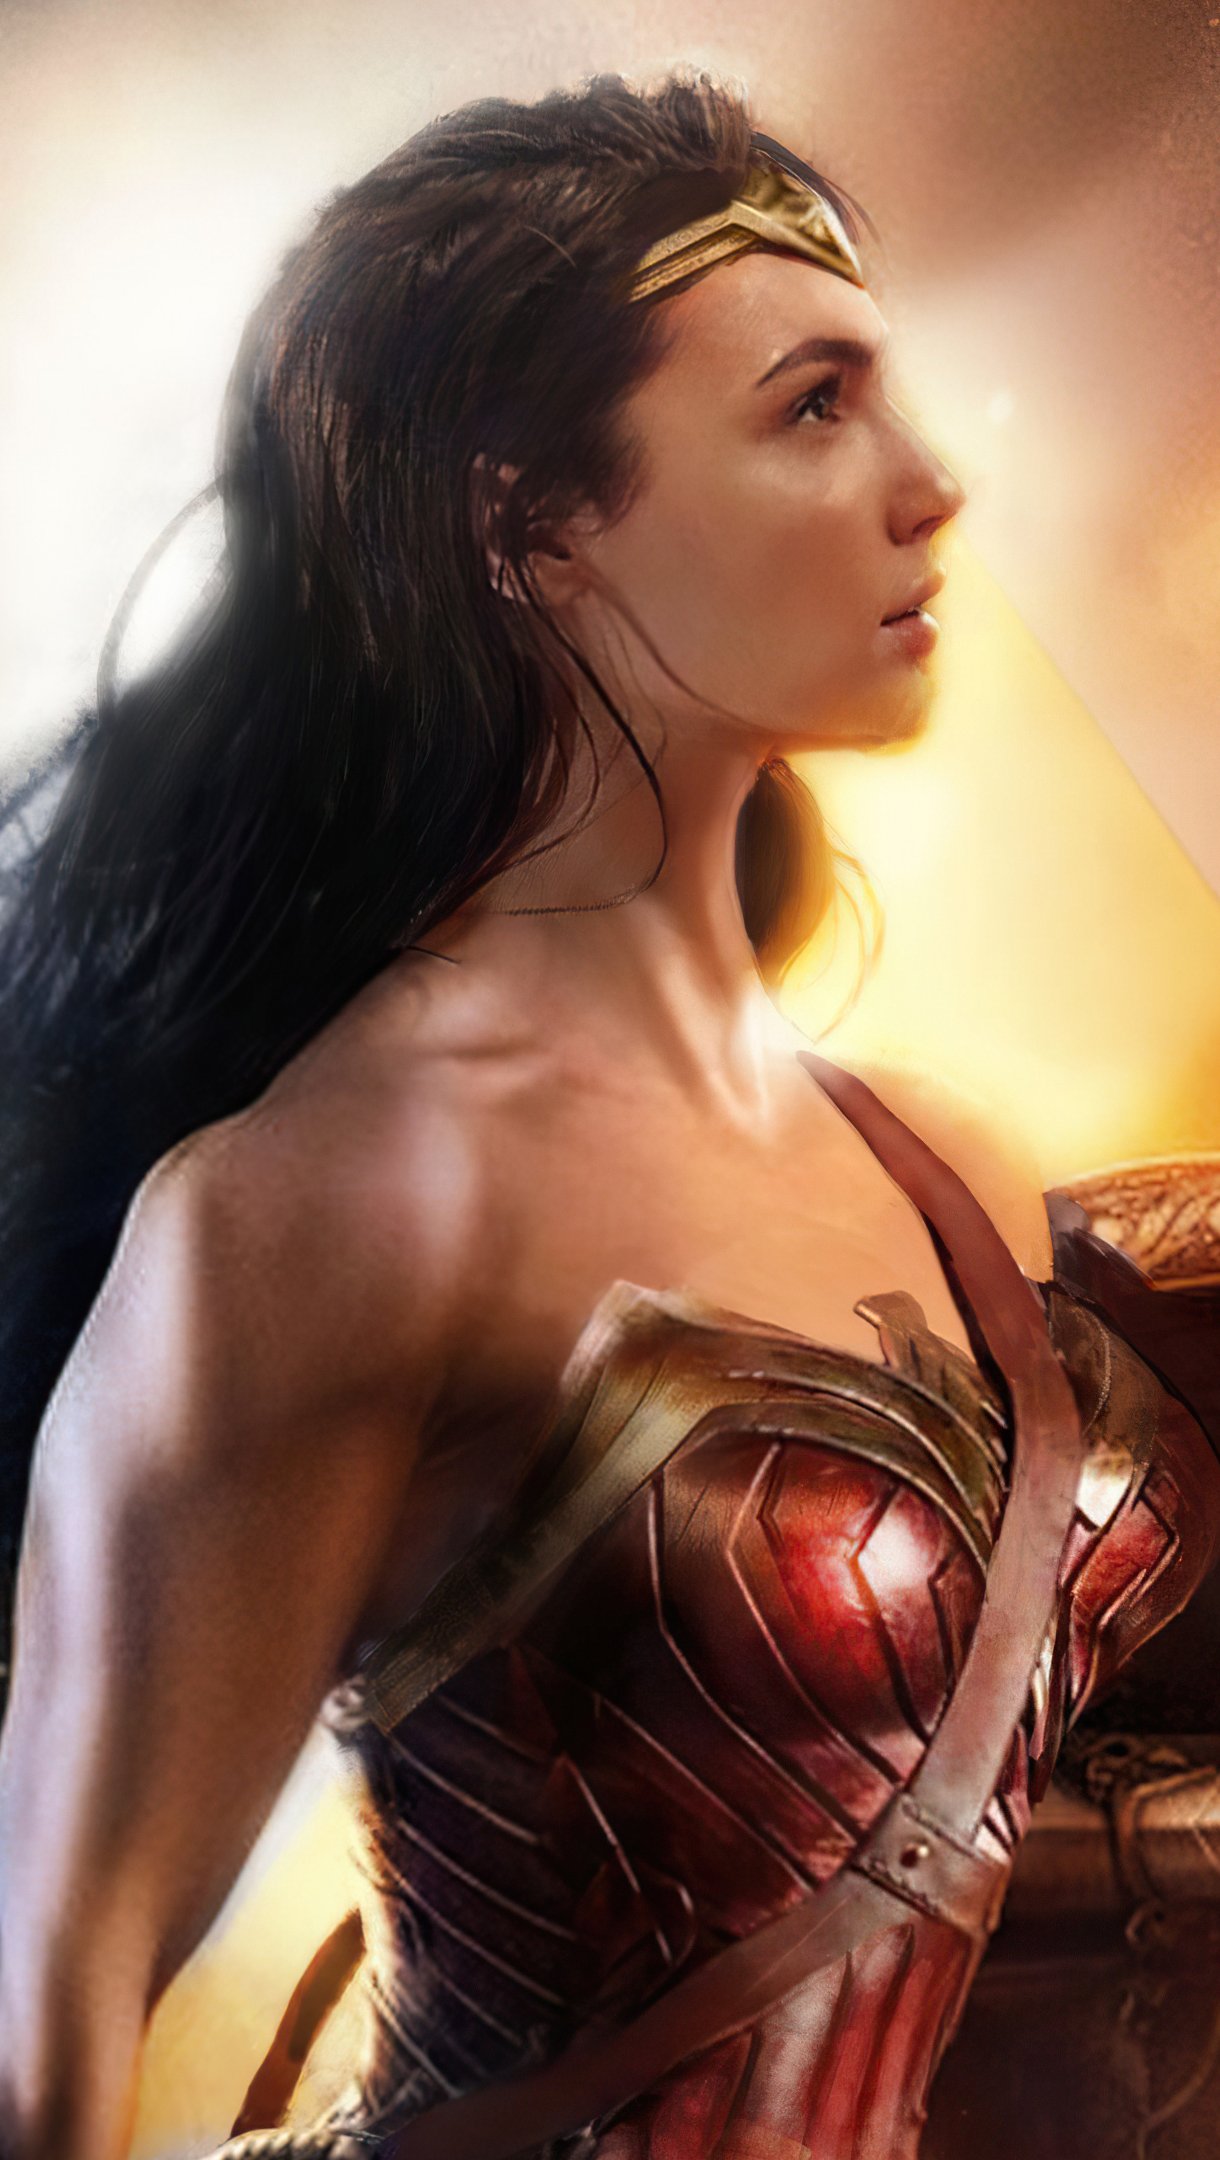 Wonder Woman Ready for anything Wallpaper 4k Ultra HD ID:7537